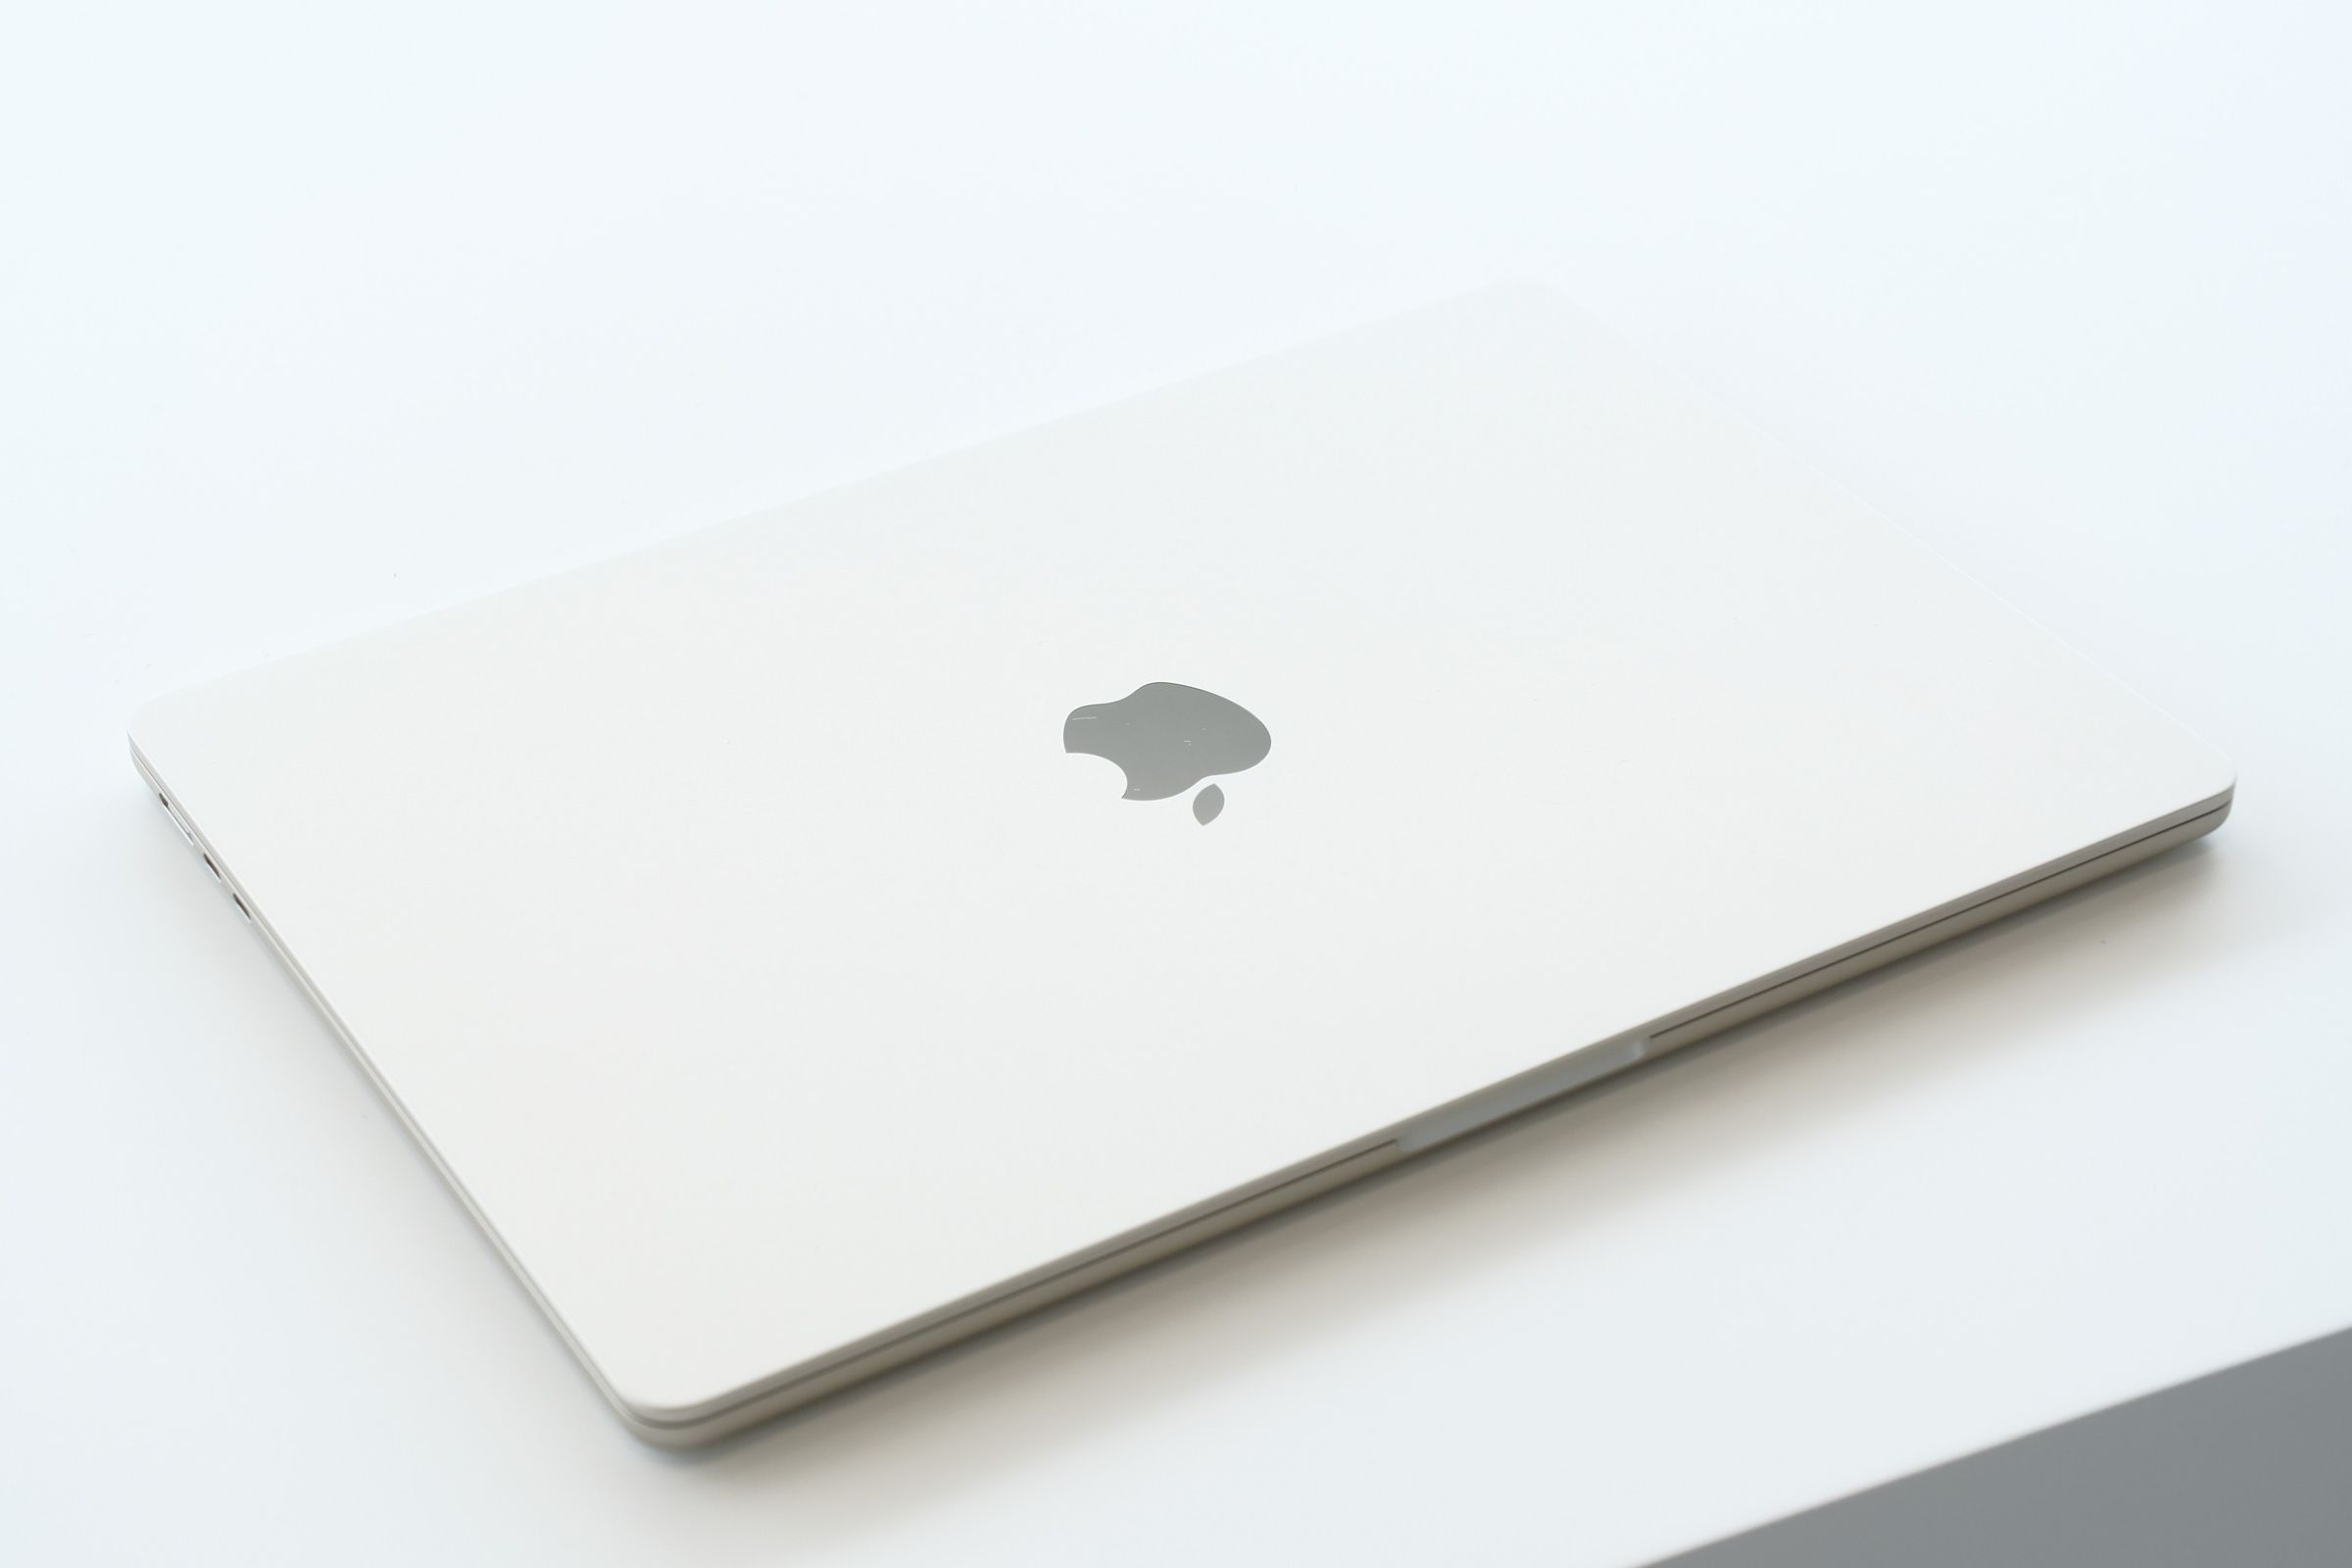 The MacBook Air closed, seen from above.